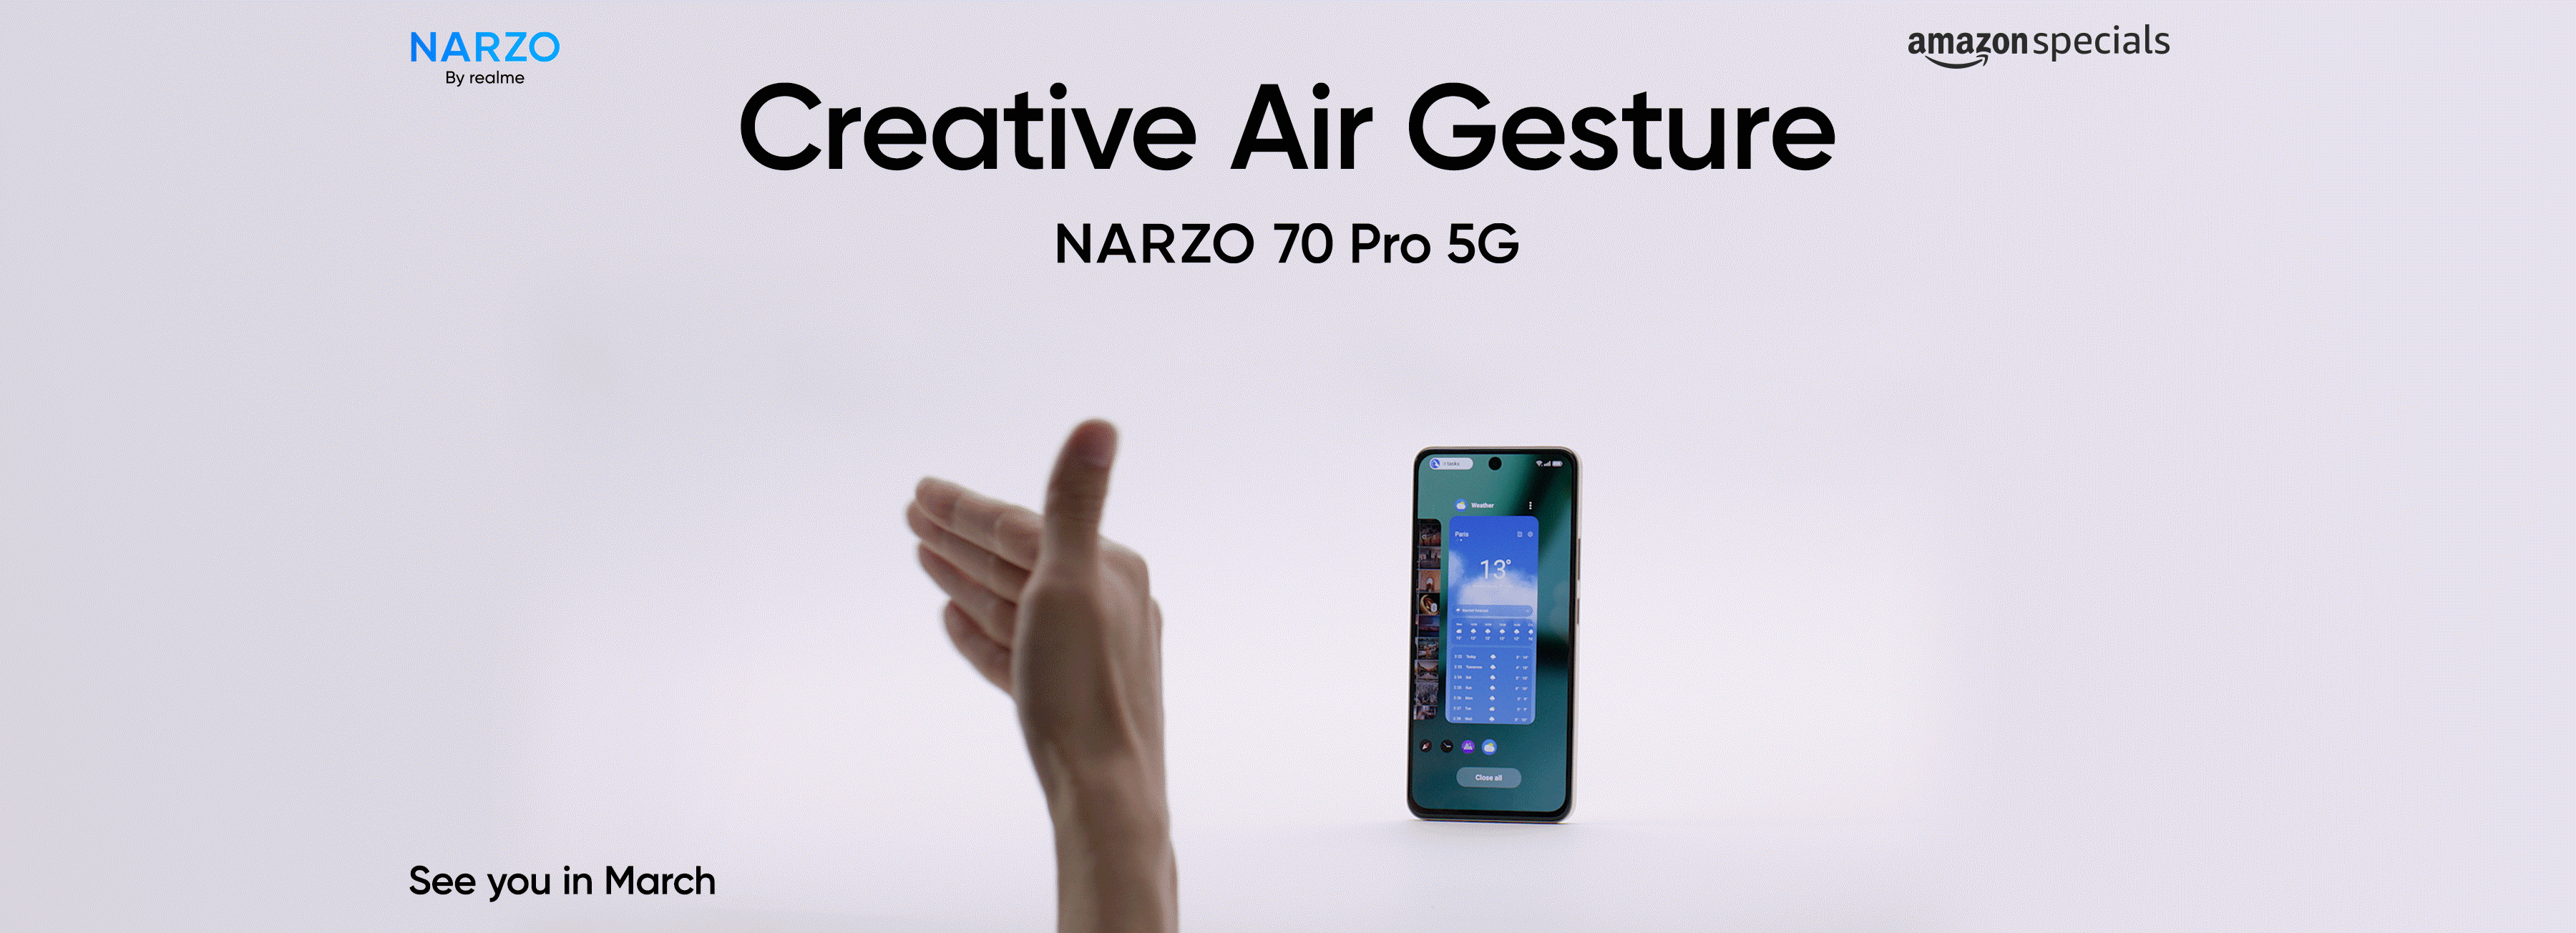 Realme Narzo 70 Pro 5G Air Gesture Feature